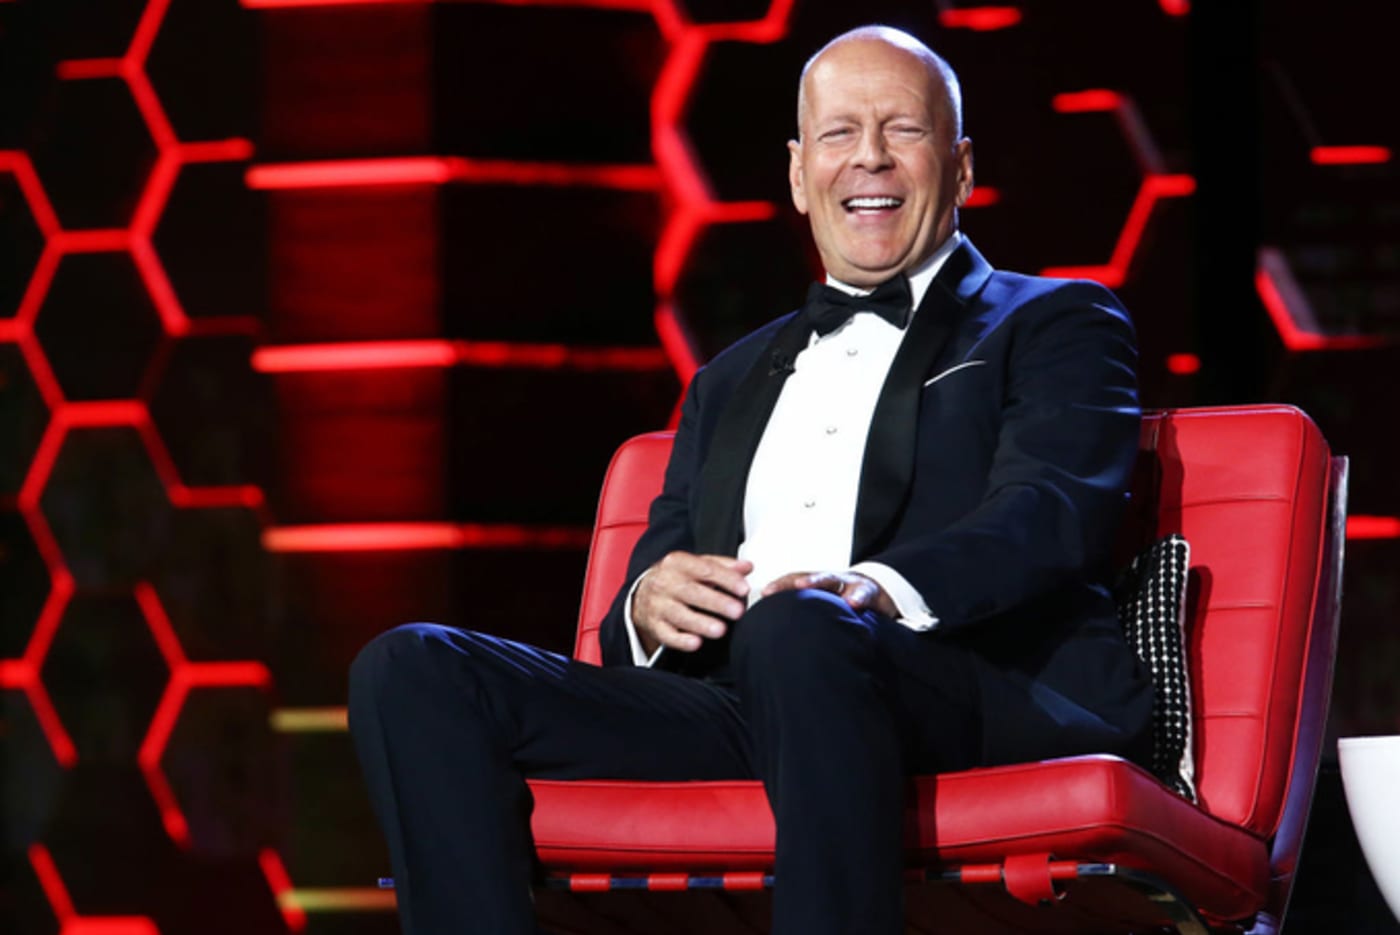 Bruce Willis attends the Comedy Central Roast Of Bruce Willis